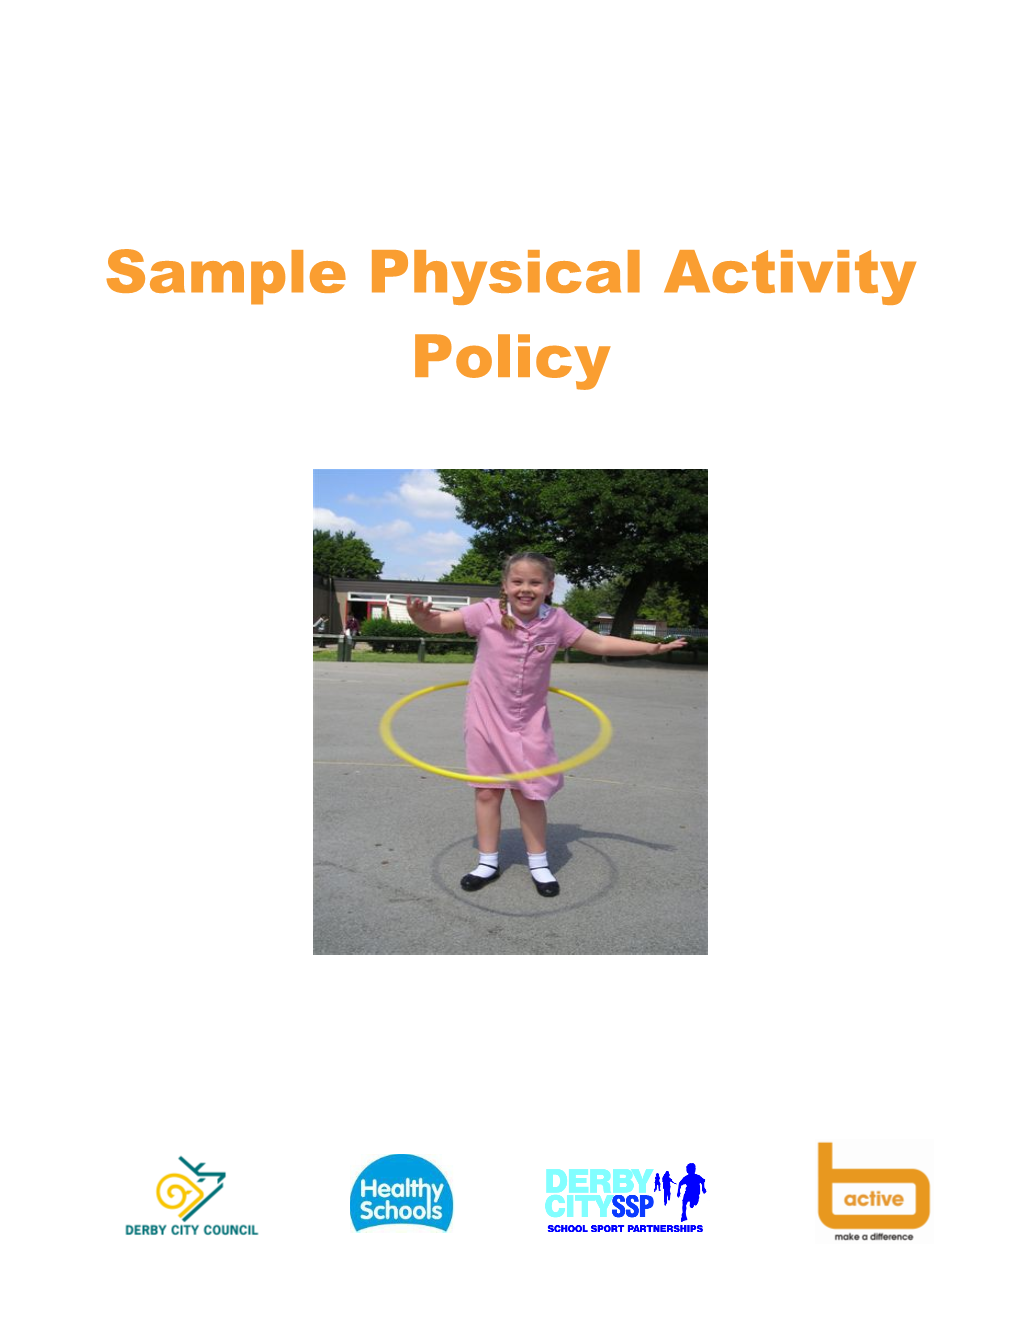 Sample Physical Activity Policy